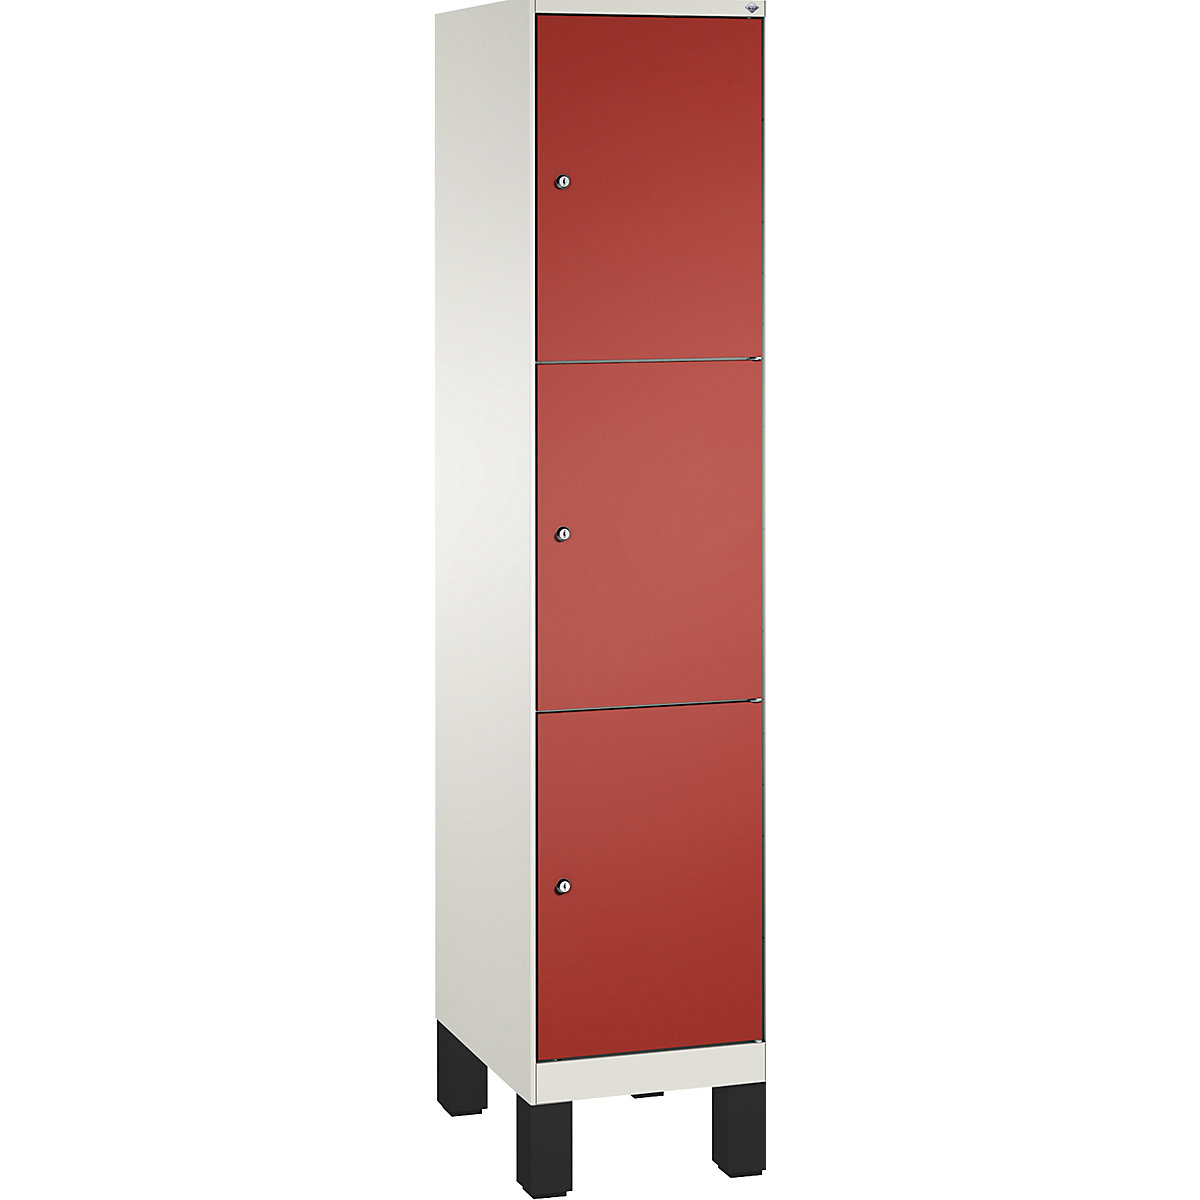 EVOLO locker unit, with feet – C+P, 1 compartment, 3 shelf compartments, compartment width 400 mm, traffic white / flame red